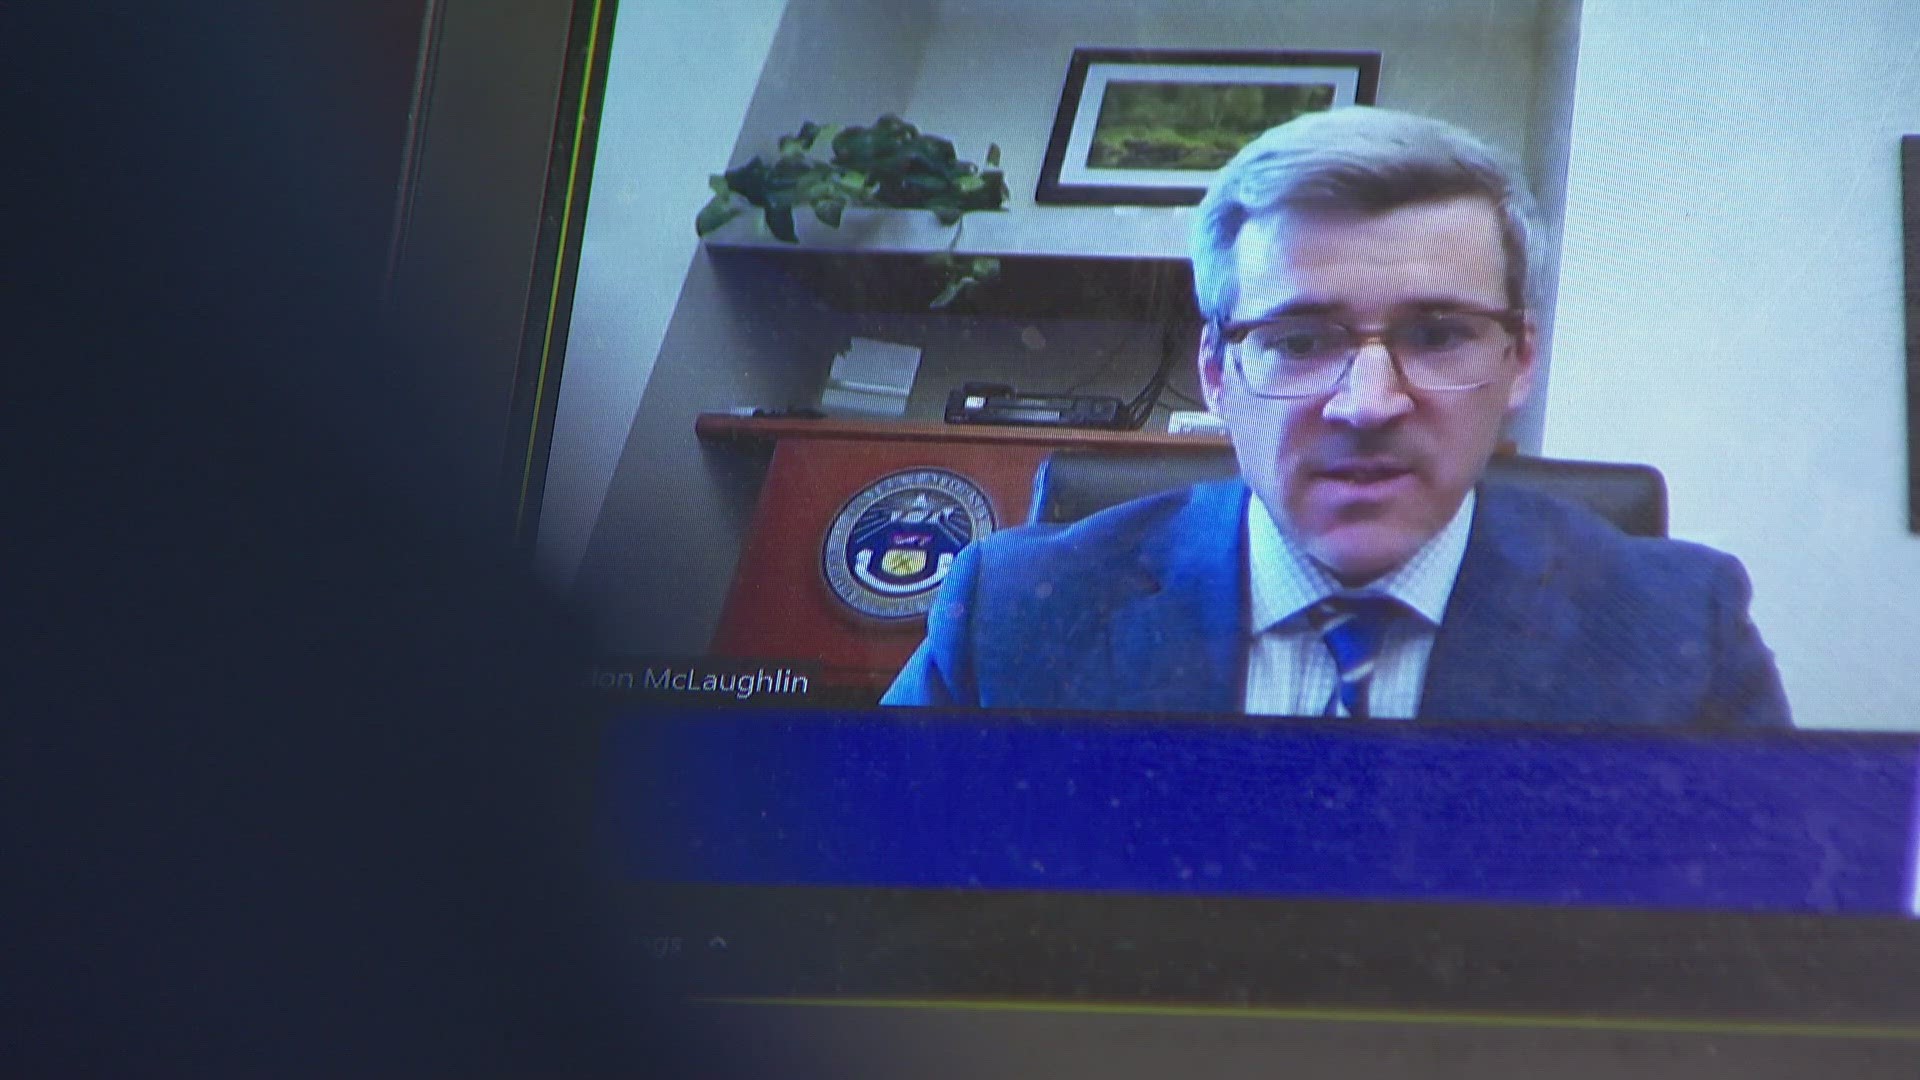 Larimer County District Attorney Gordon McLaughlin held a virtual town hall Monday afternoon to discuss his decision.